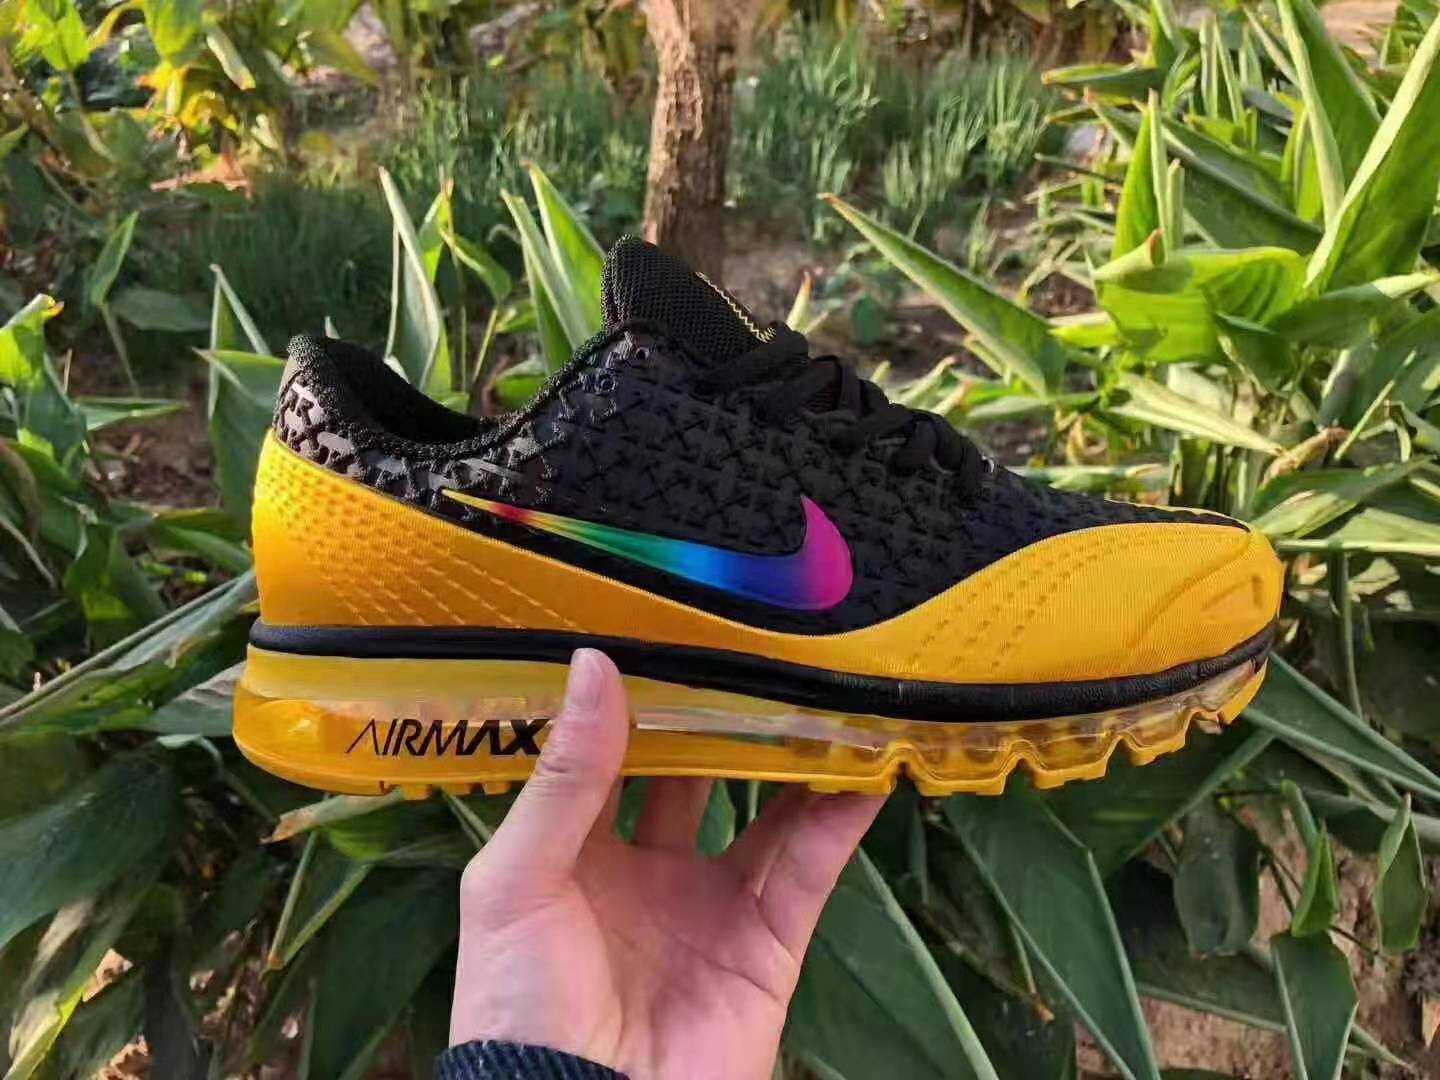 Men's Hot sale Running weapon Nike Air Max 2019 Shoes 089